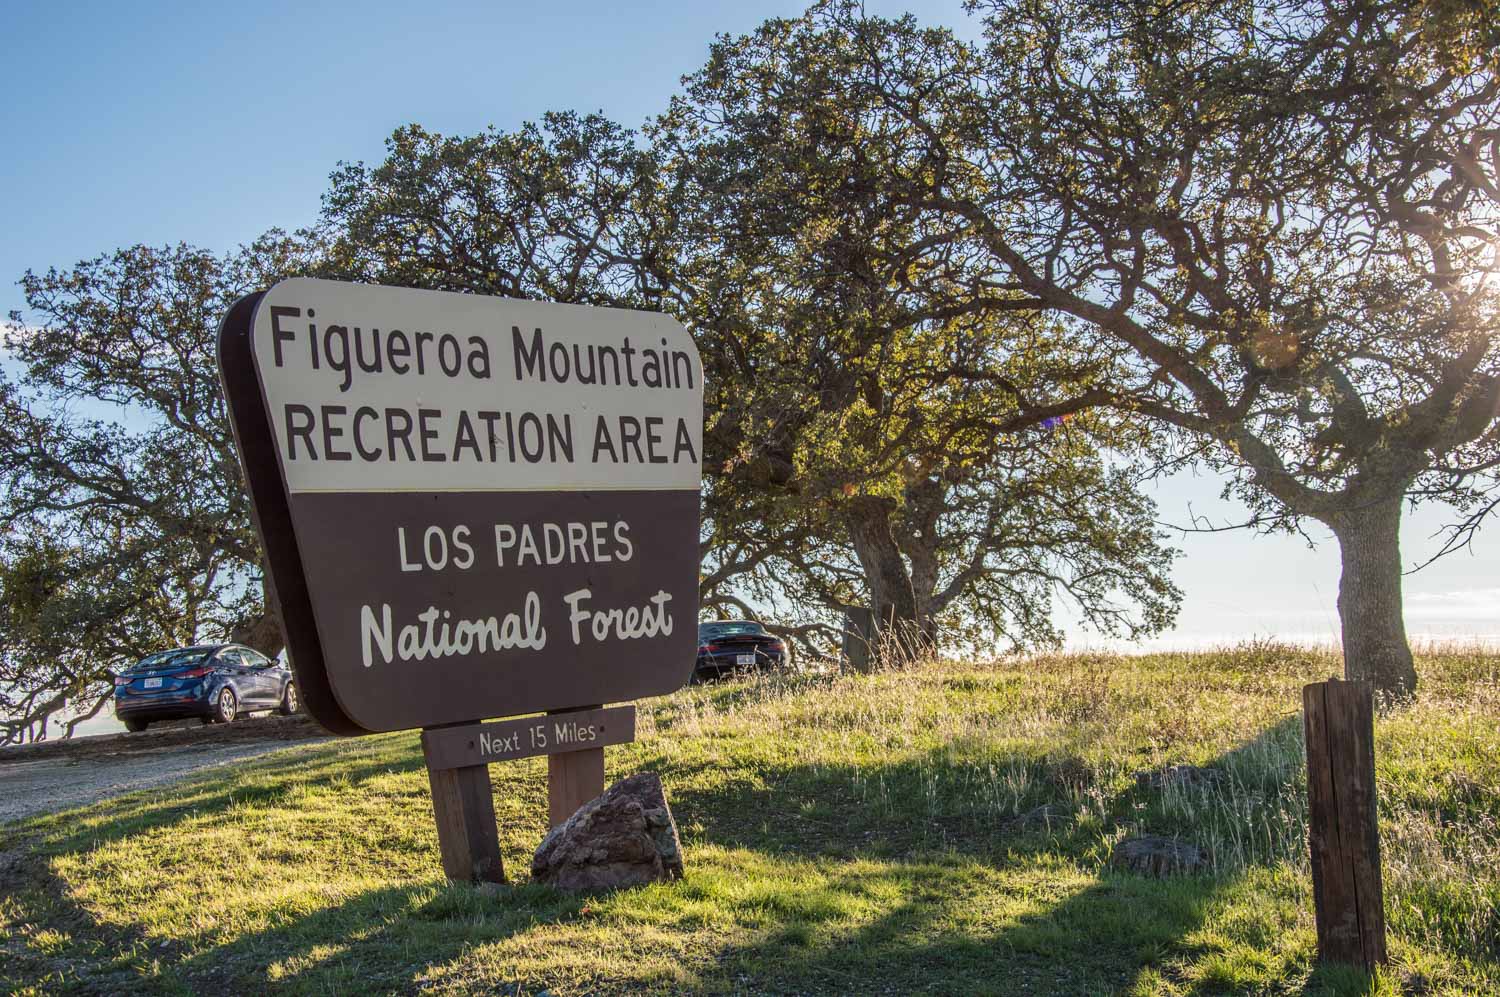 Los Padres National Forest extends recreational shooting ban for six months